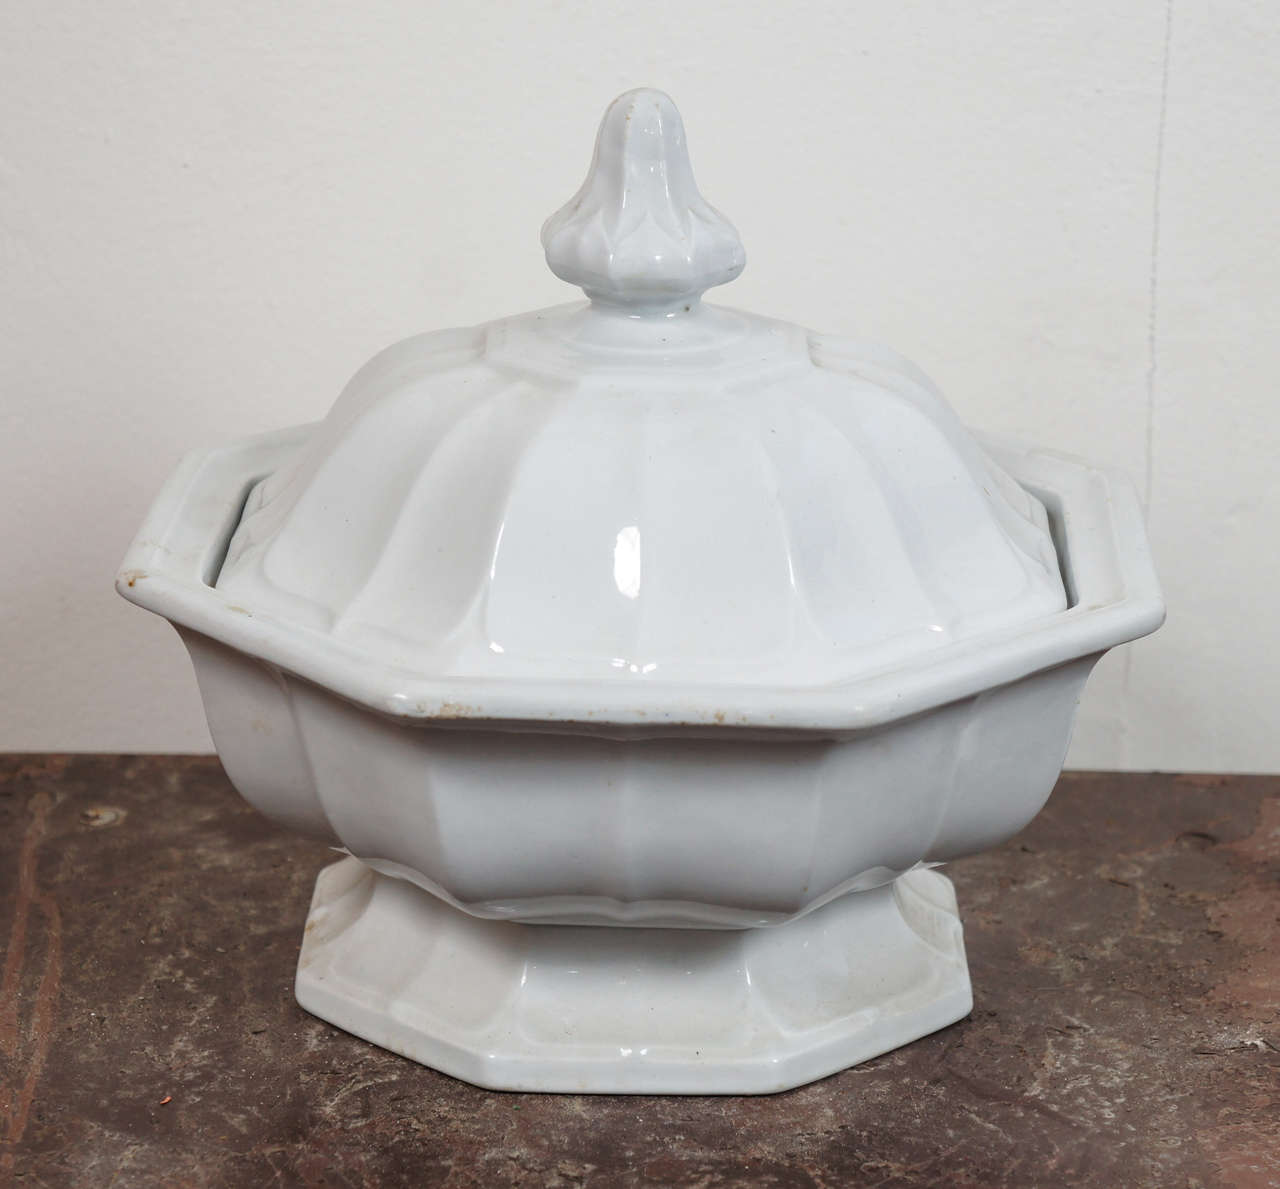 Everyone needs a useful tureen for vegetables or small container for serving soup. White ironstone footed tureen and cover.